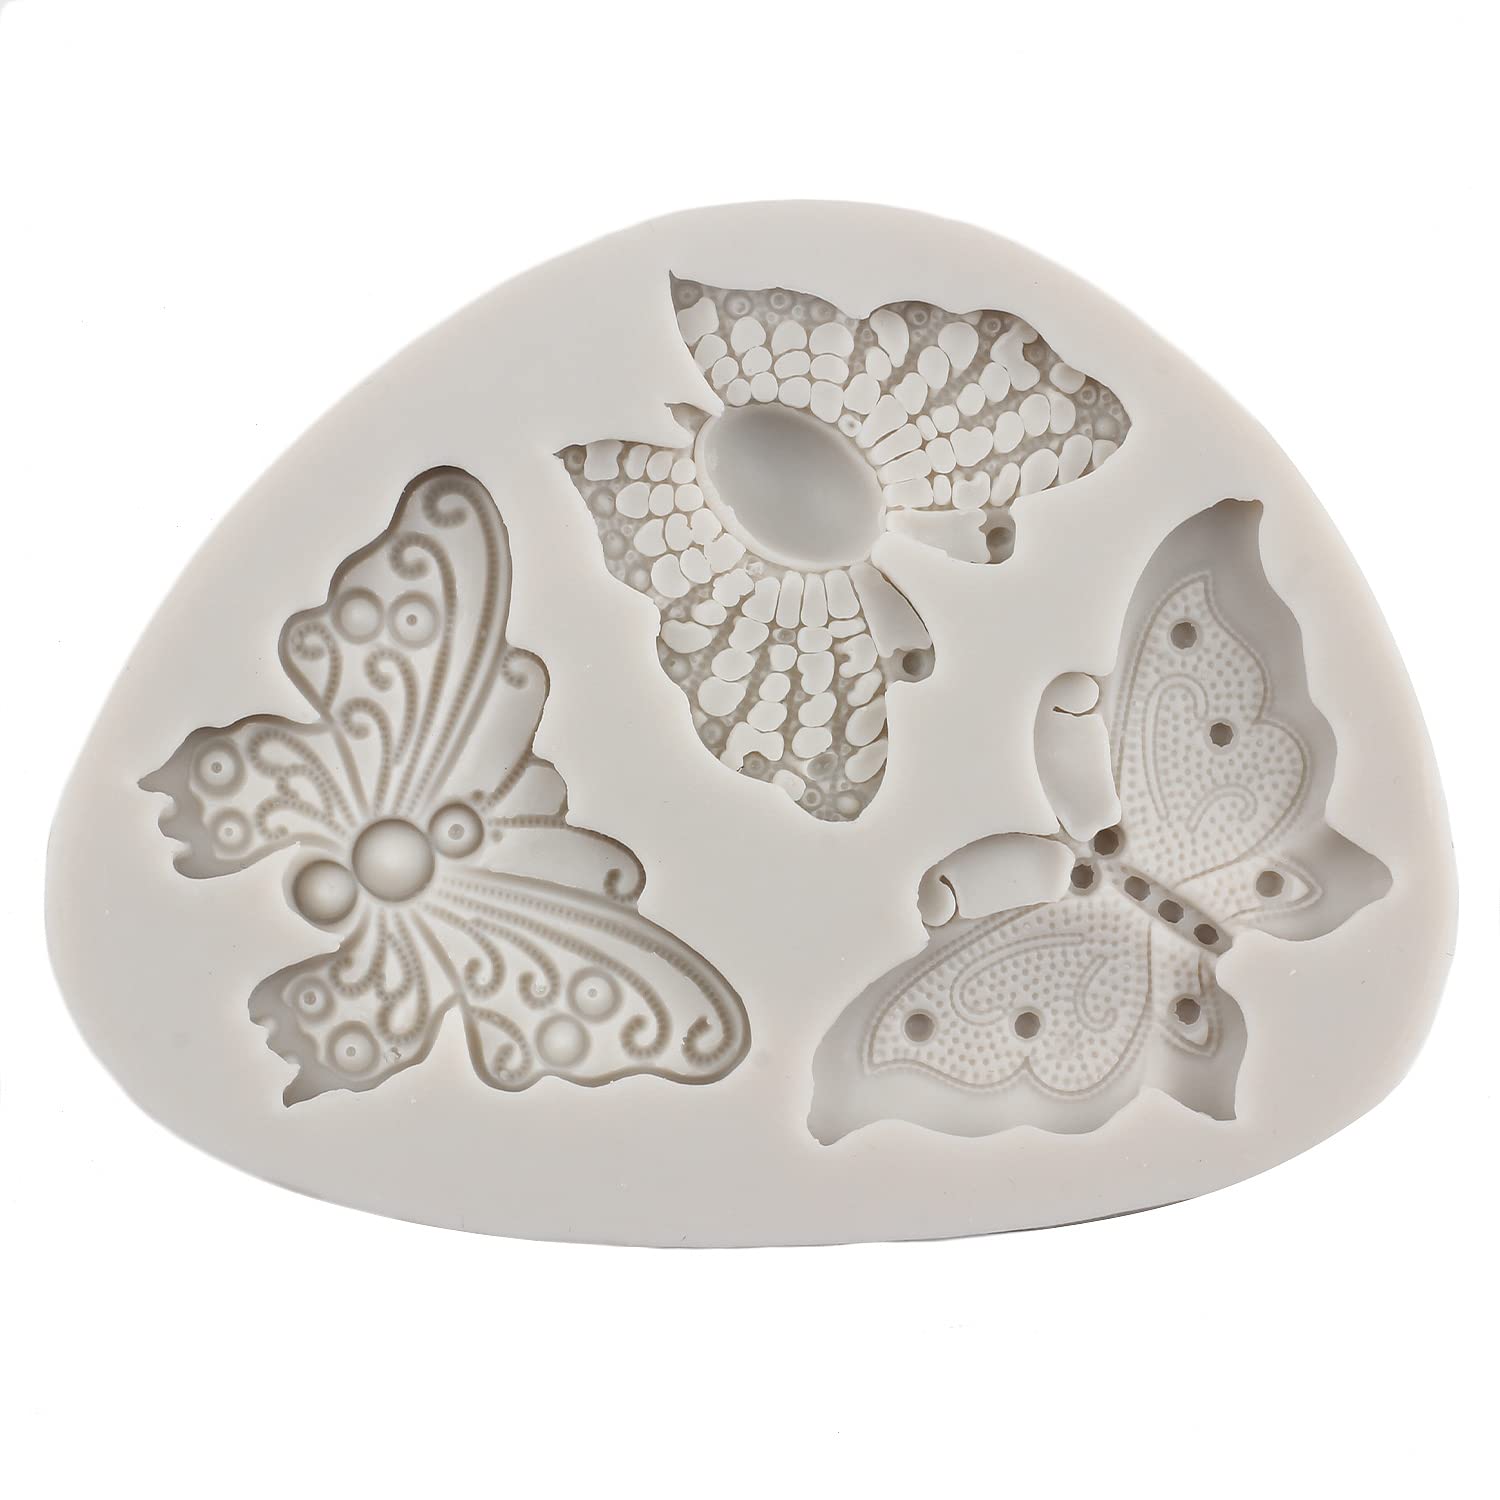 MYPRACS Butterfly Silicone Molds Mini Butterfly Fondant Cake Mold For Cake Decoration Cupcake Topper Chocolate Gum Paste Candy Polymer Clay Set Of 4